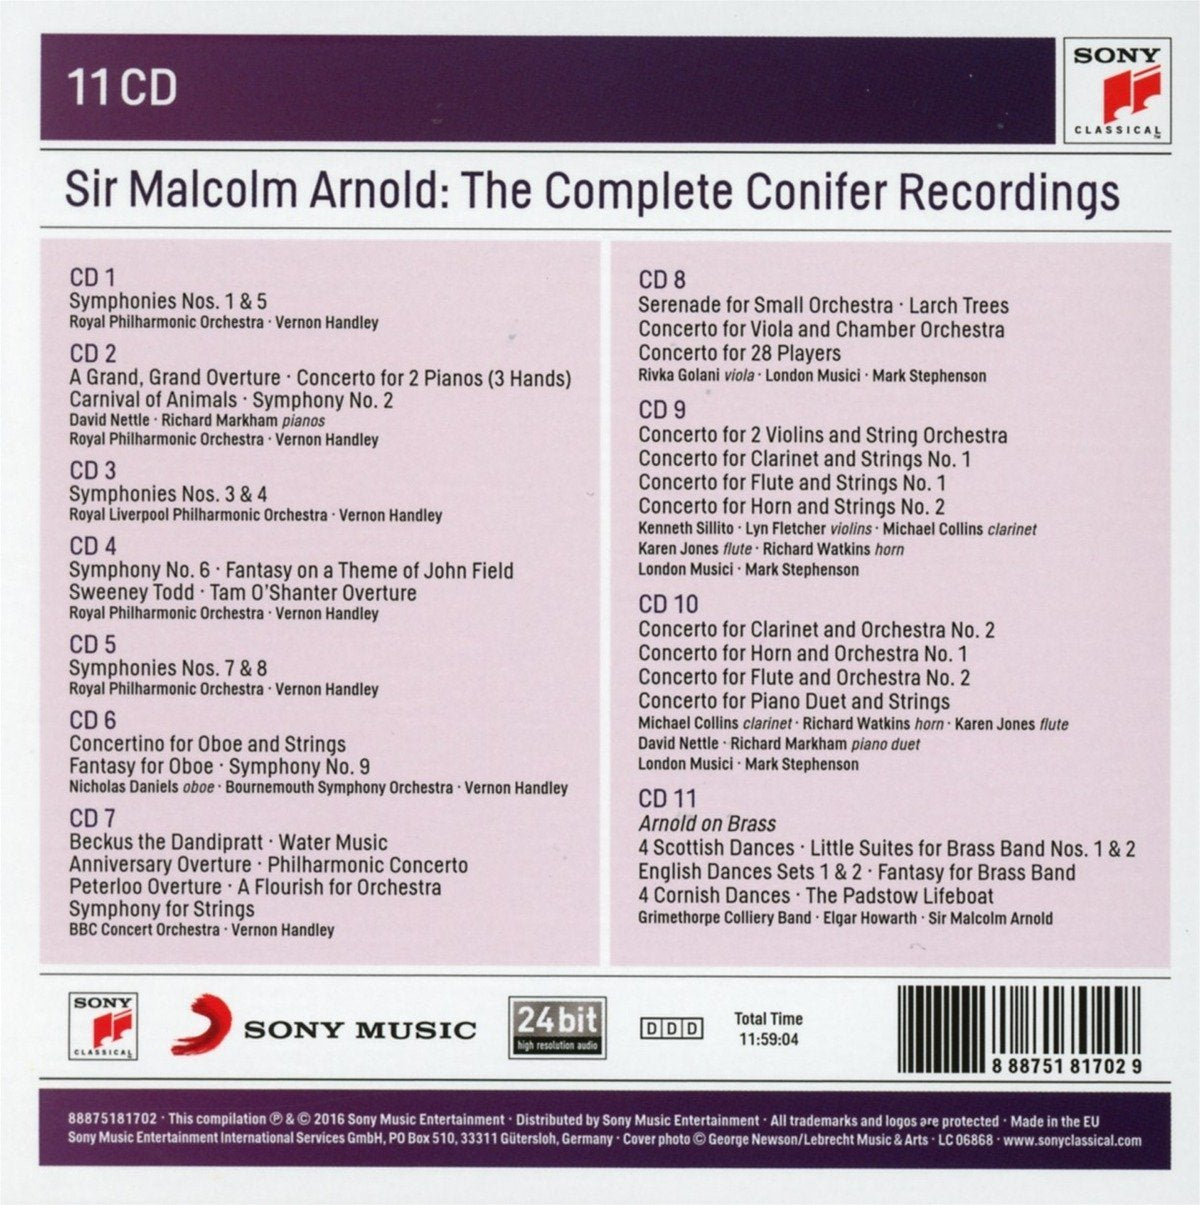 ARNOLD, SIR MALCOLM: THE COMPLETE CONIFER RECORDINGS (11 CDS)